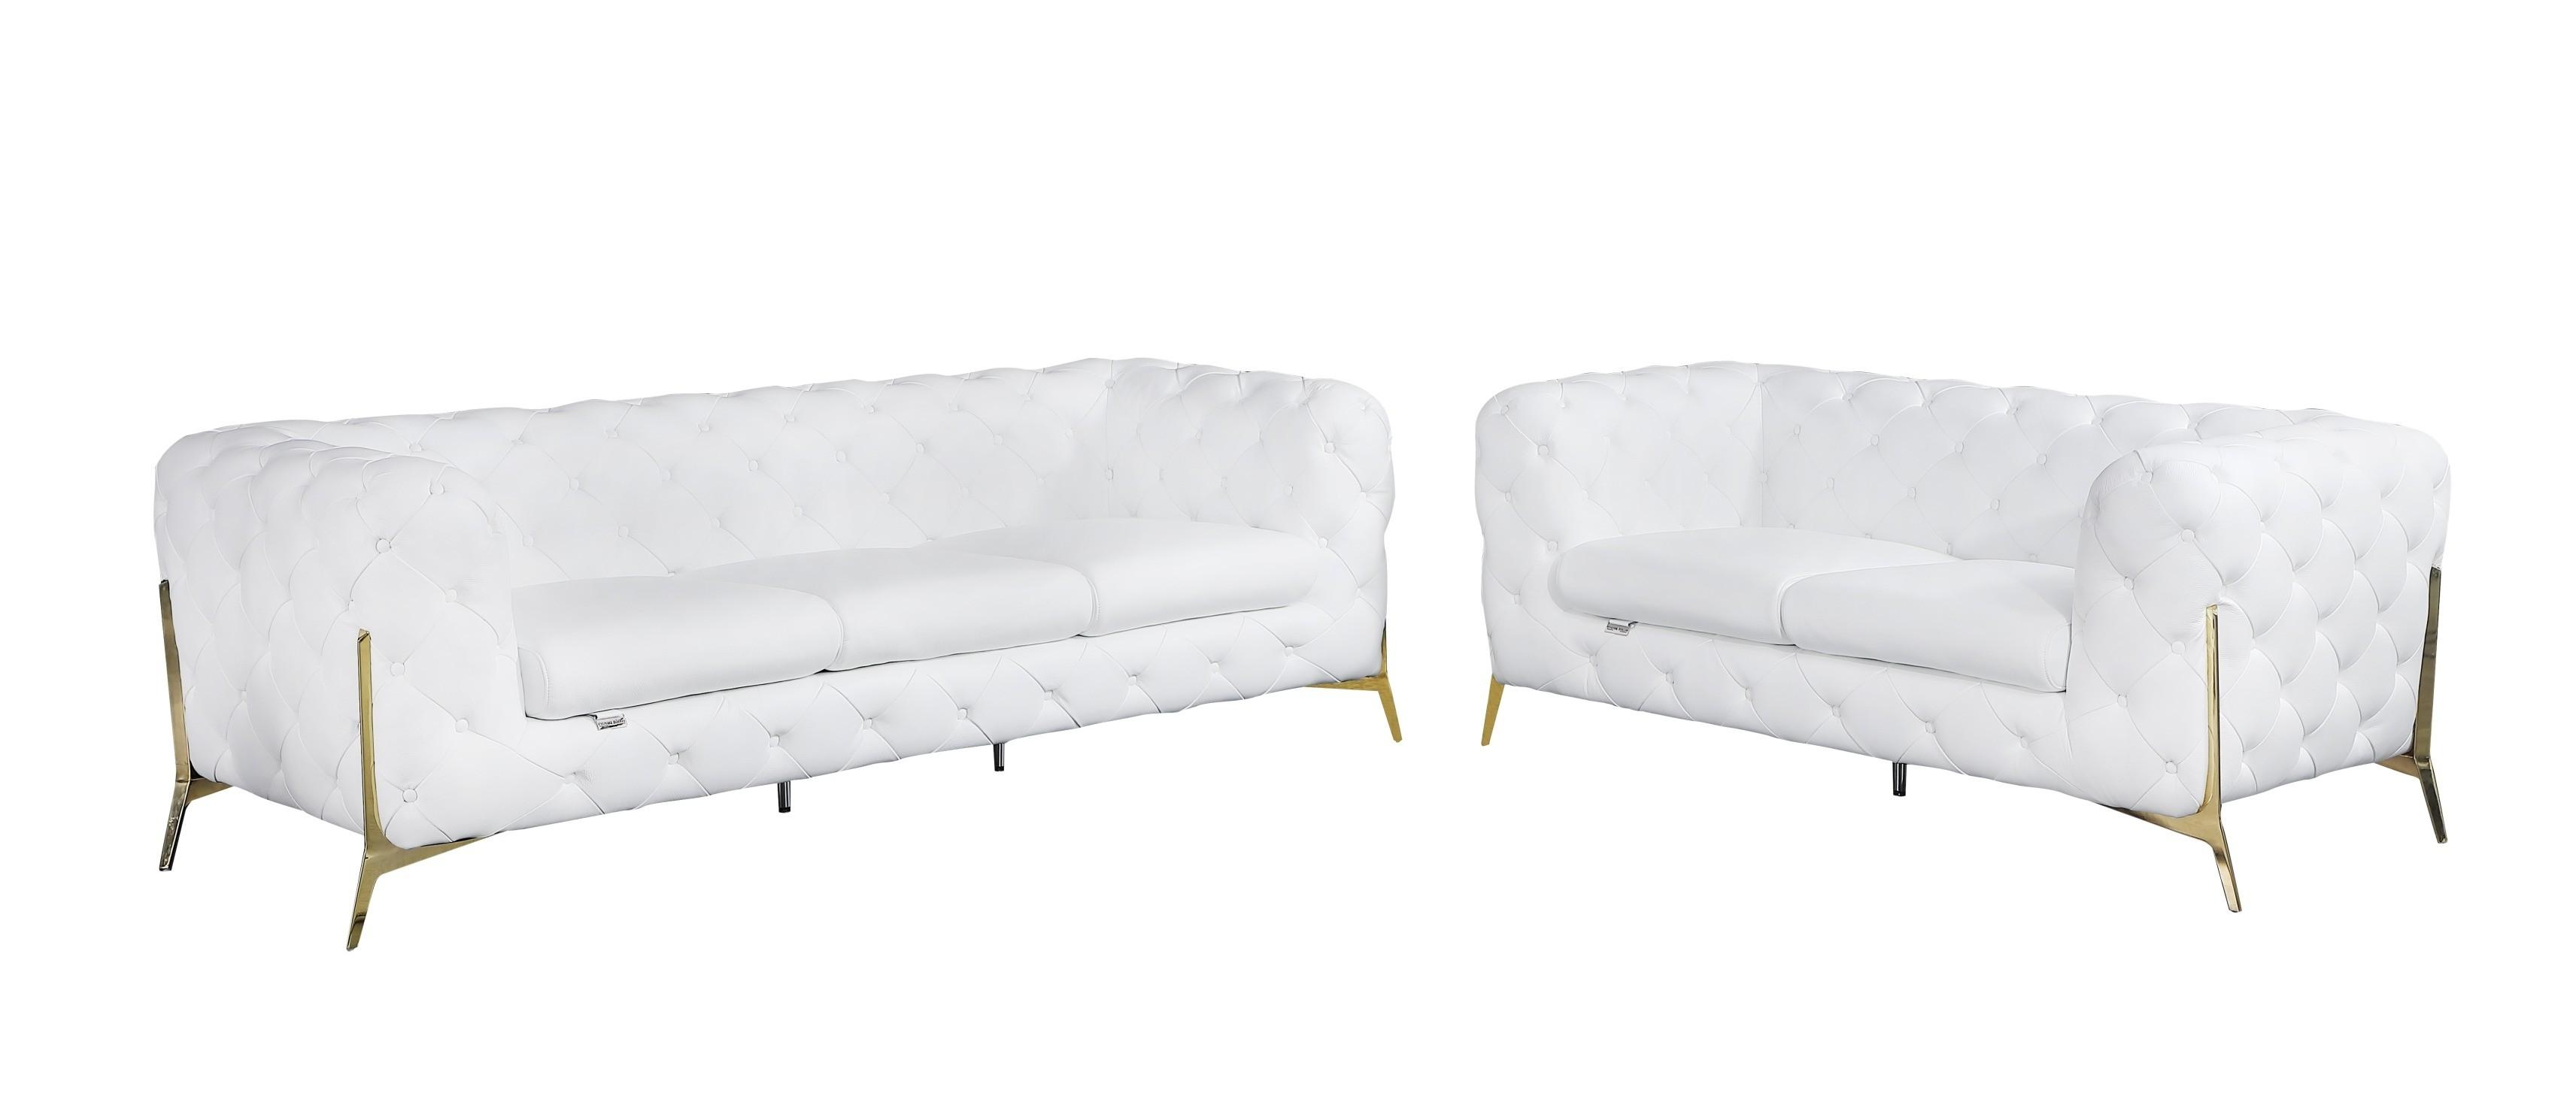 Contemporary Sofa and Loveseat Set 970 970-WHITE-2PC in White Top grain leather